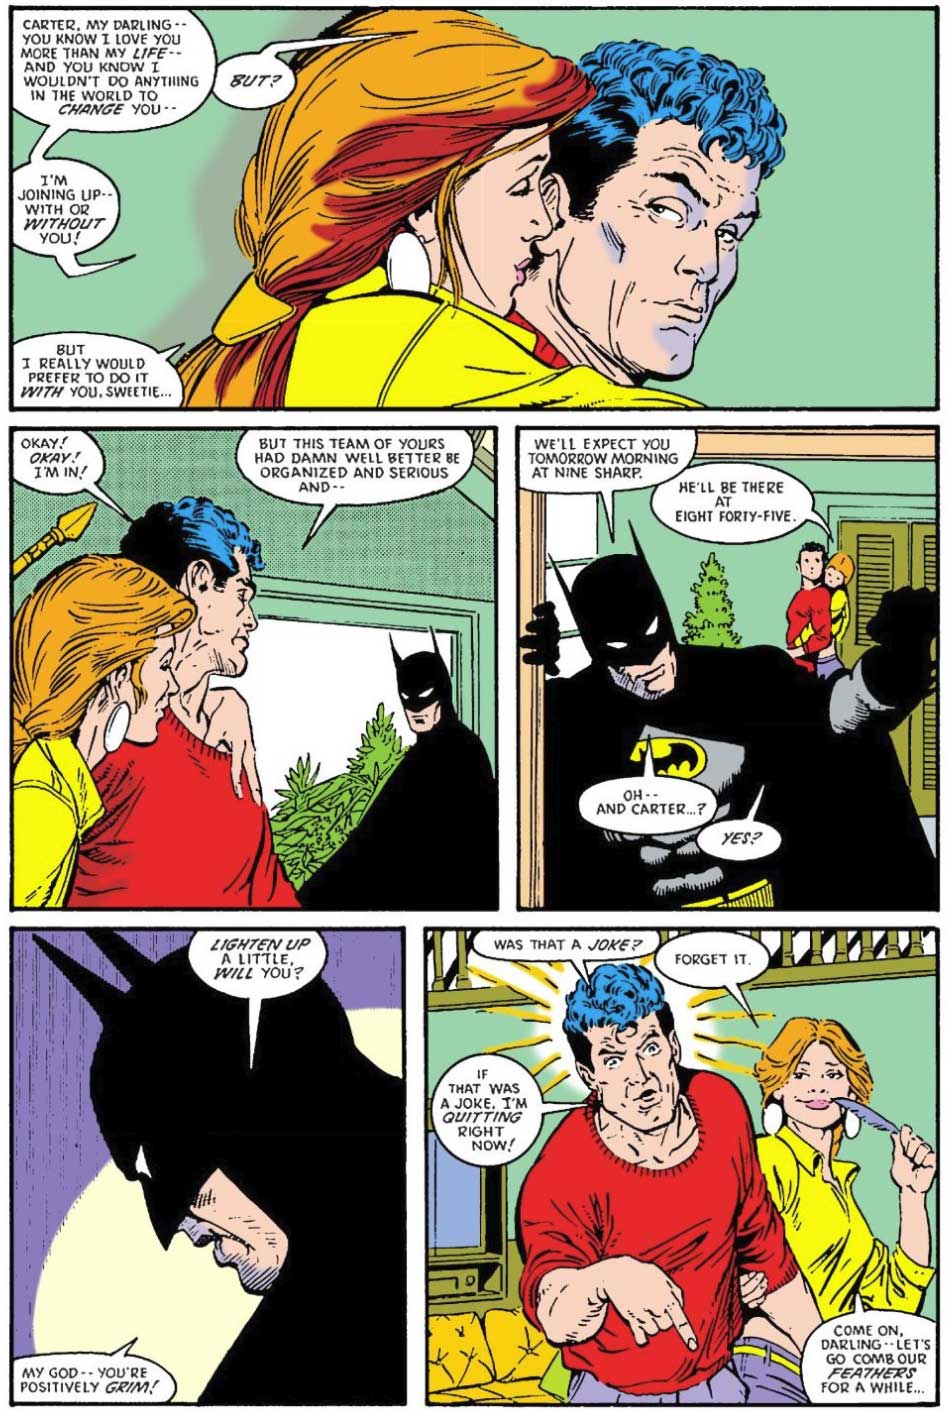 Justice League International #19 by Keith Giffen, JM DeMatteis, Kevin Maguire, and Joe Rubinstein